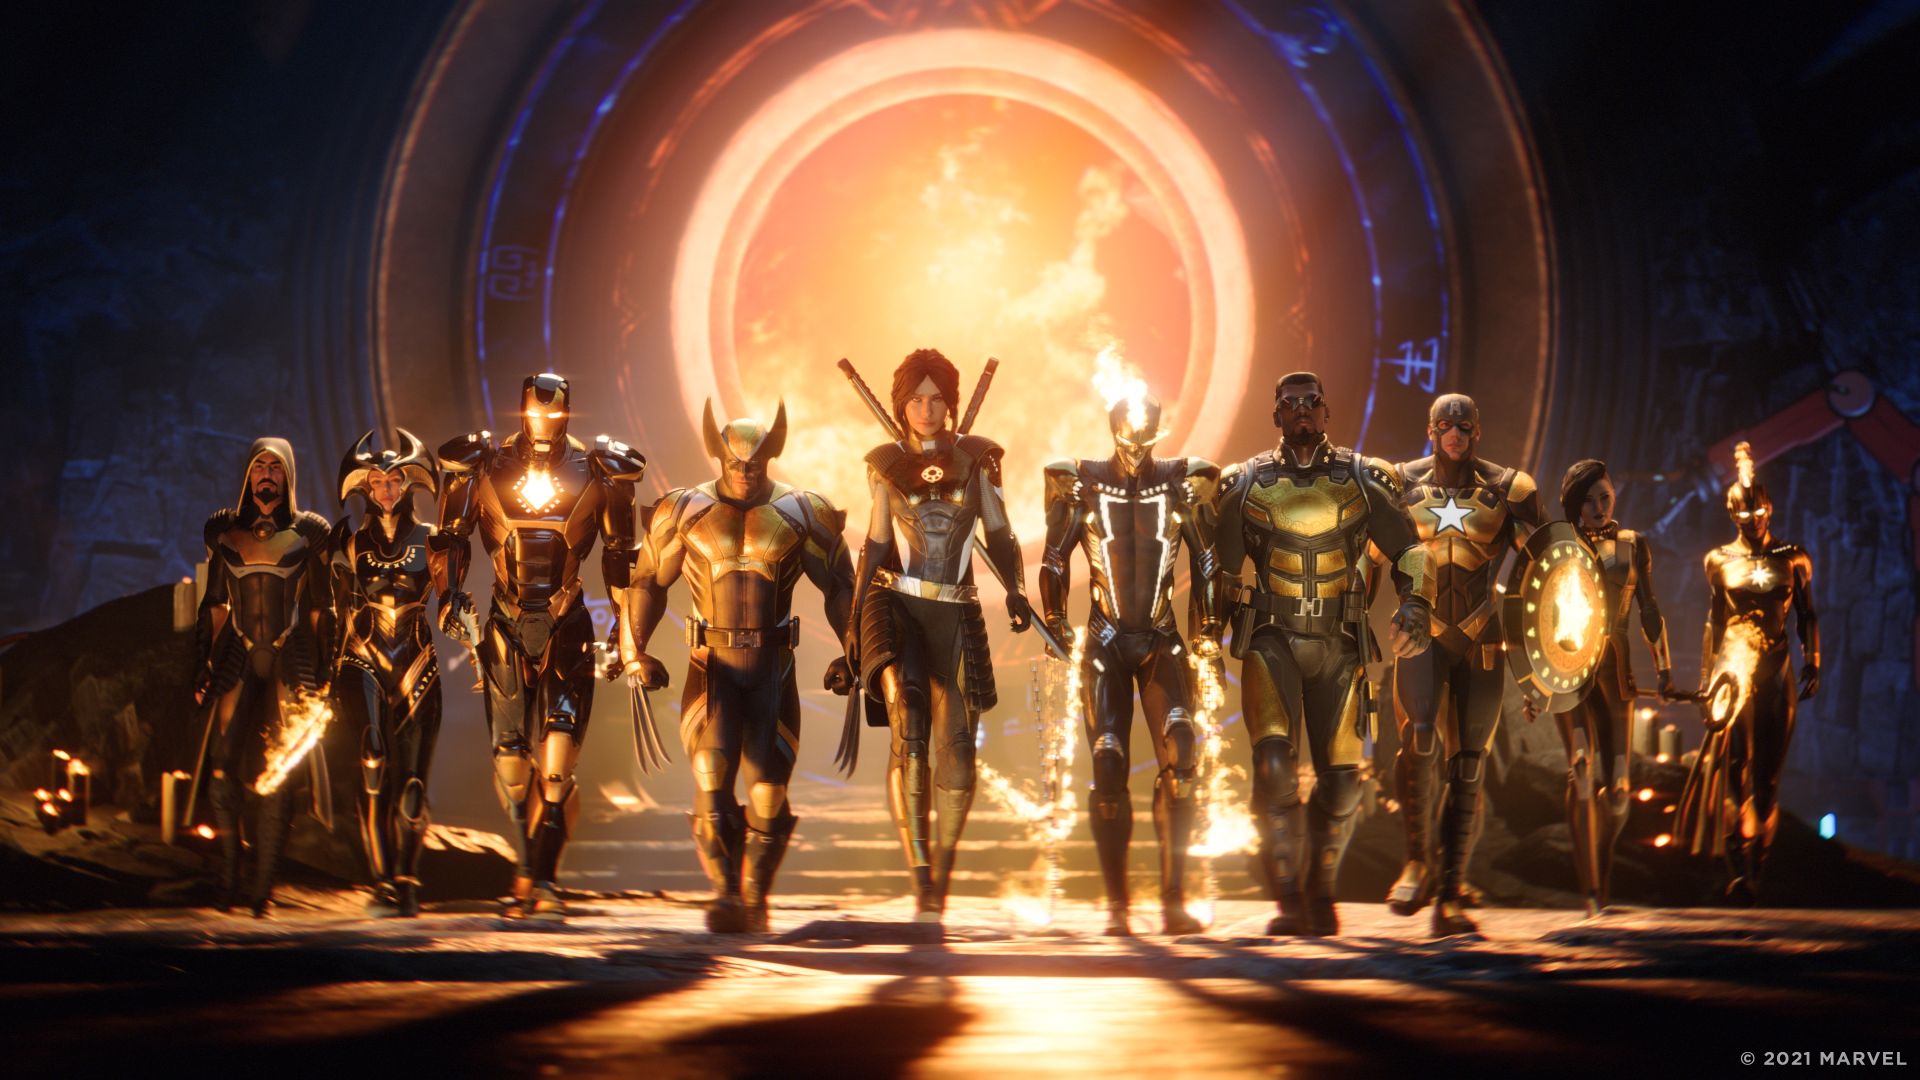 Marvel’s Midnight Suns is ‘Easily the Biggest Game We’ve Ever Made’ – Firaxis